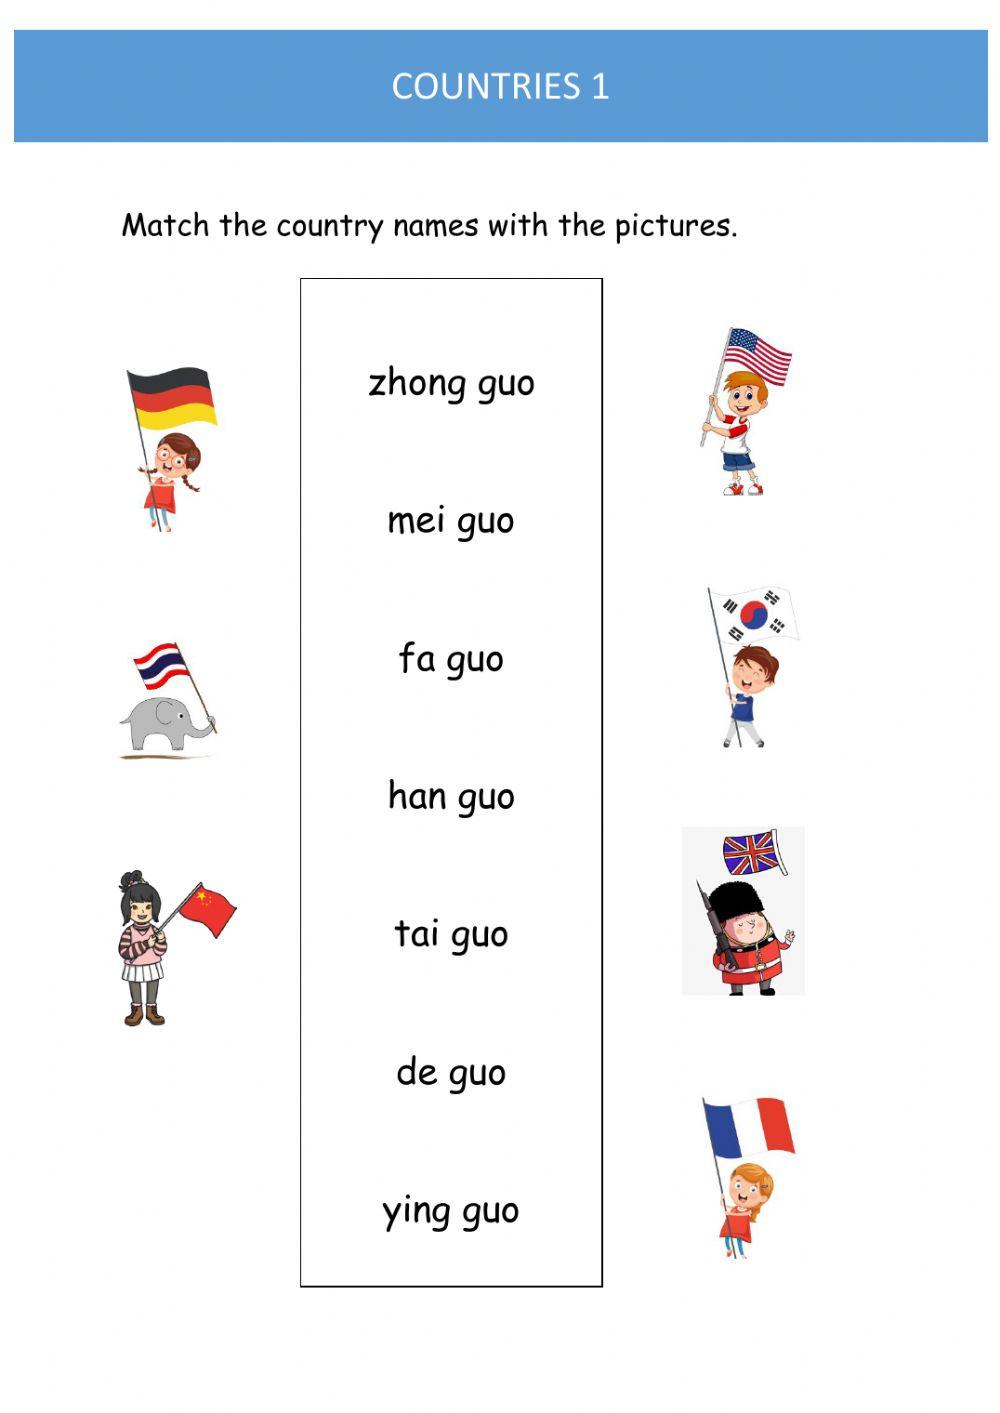 Countries 1 matching